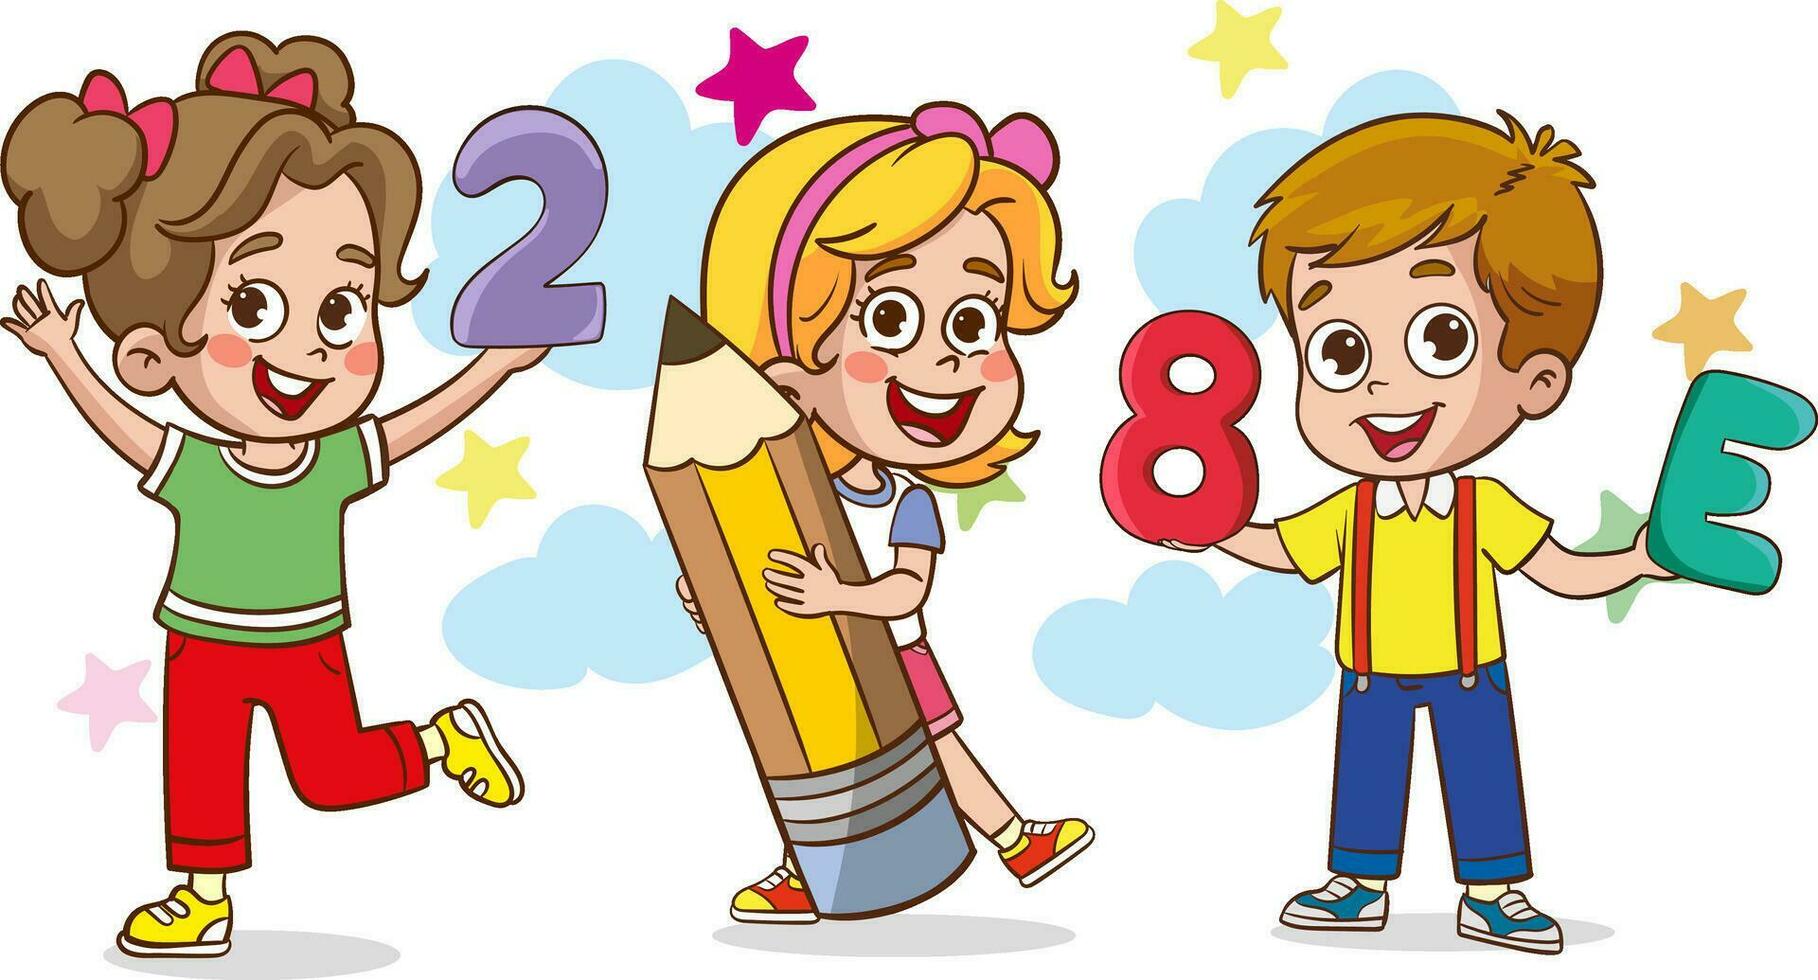 kid education vector illustration design.vector illustrations of cute kids with colored pencils